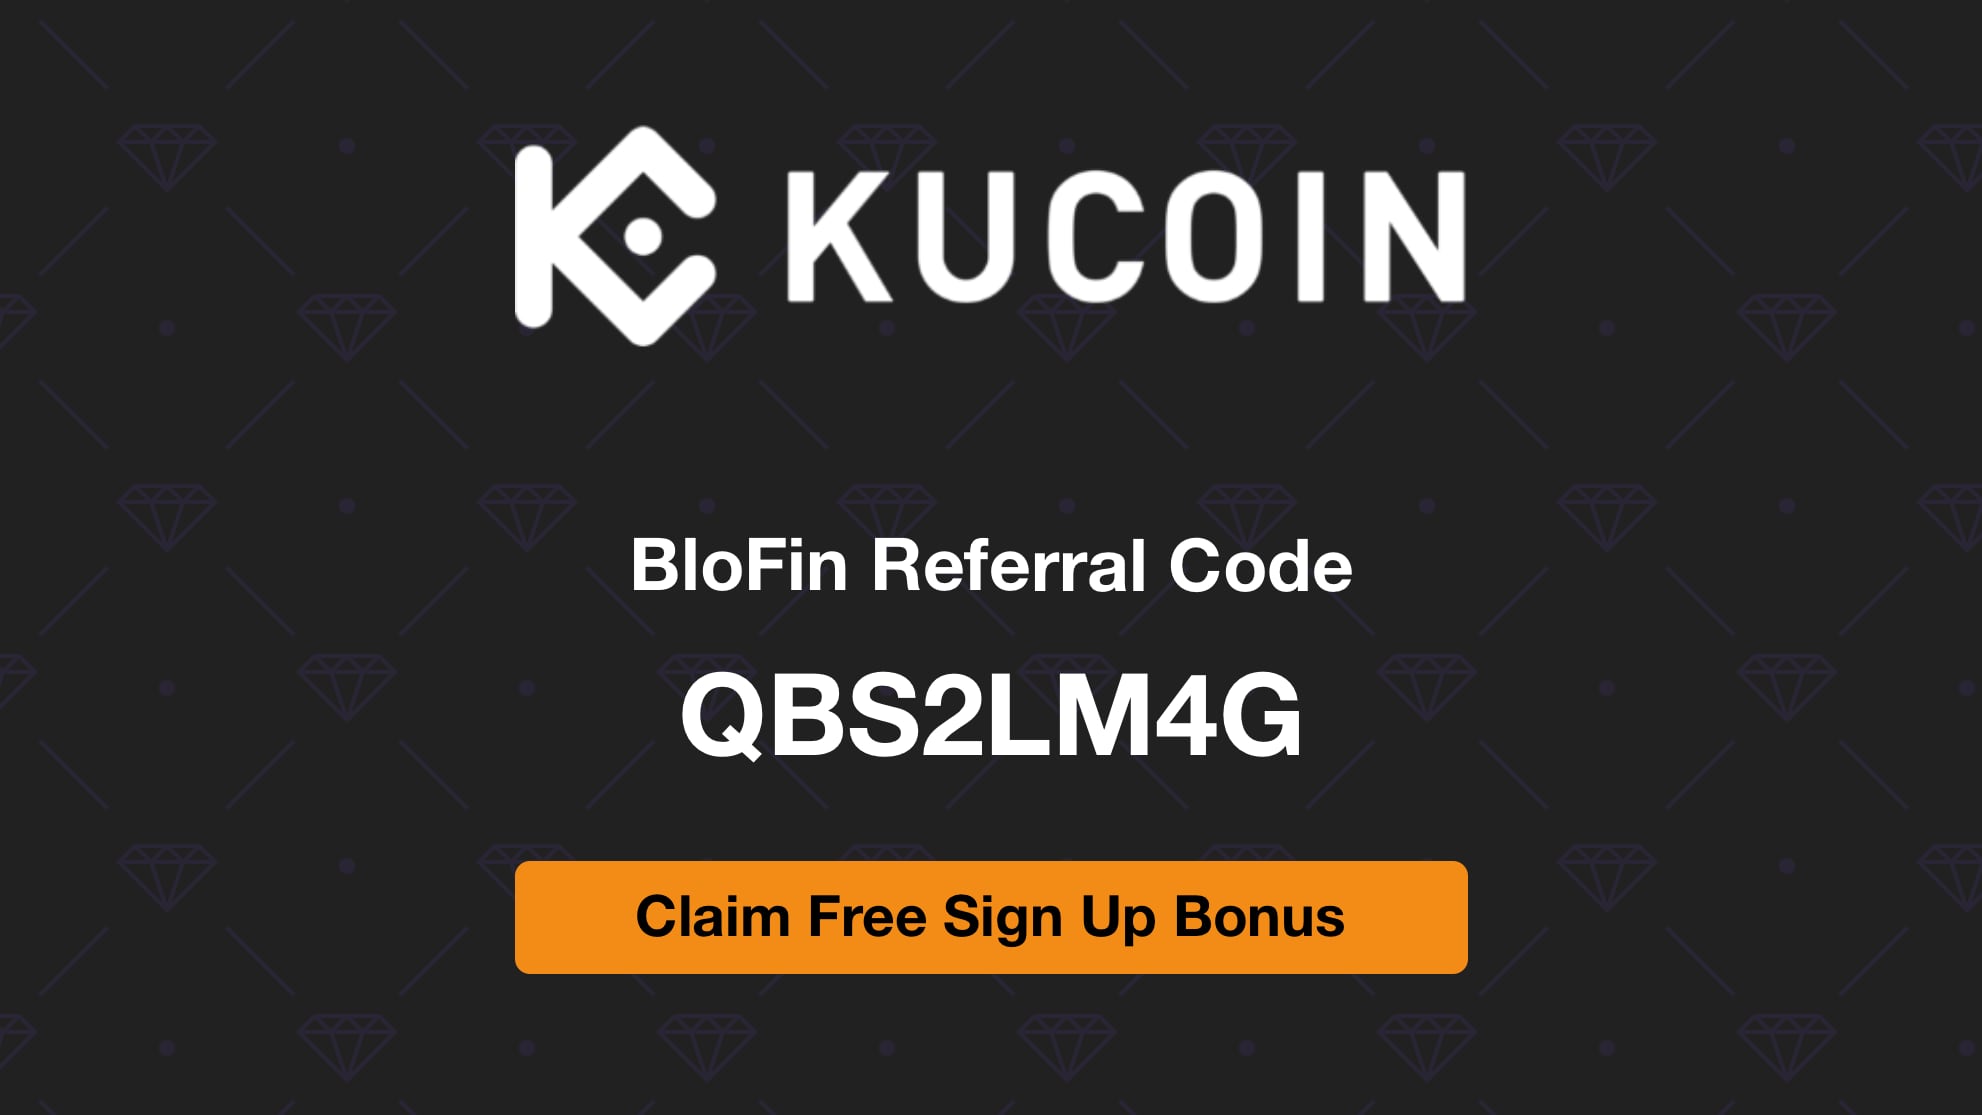 KUCOIN Referral Code QBSSS5P8